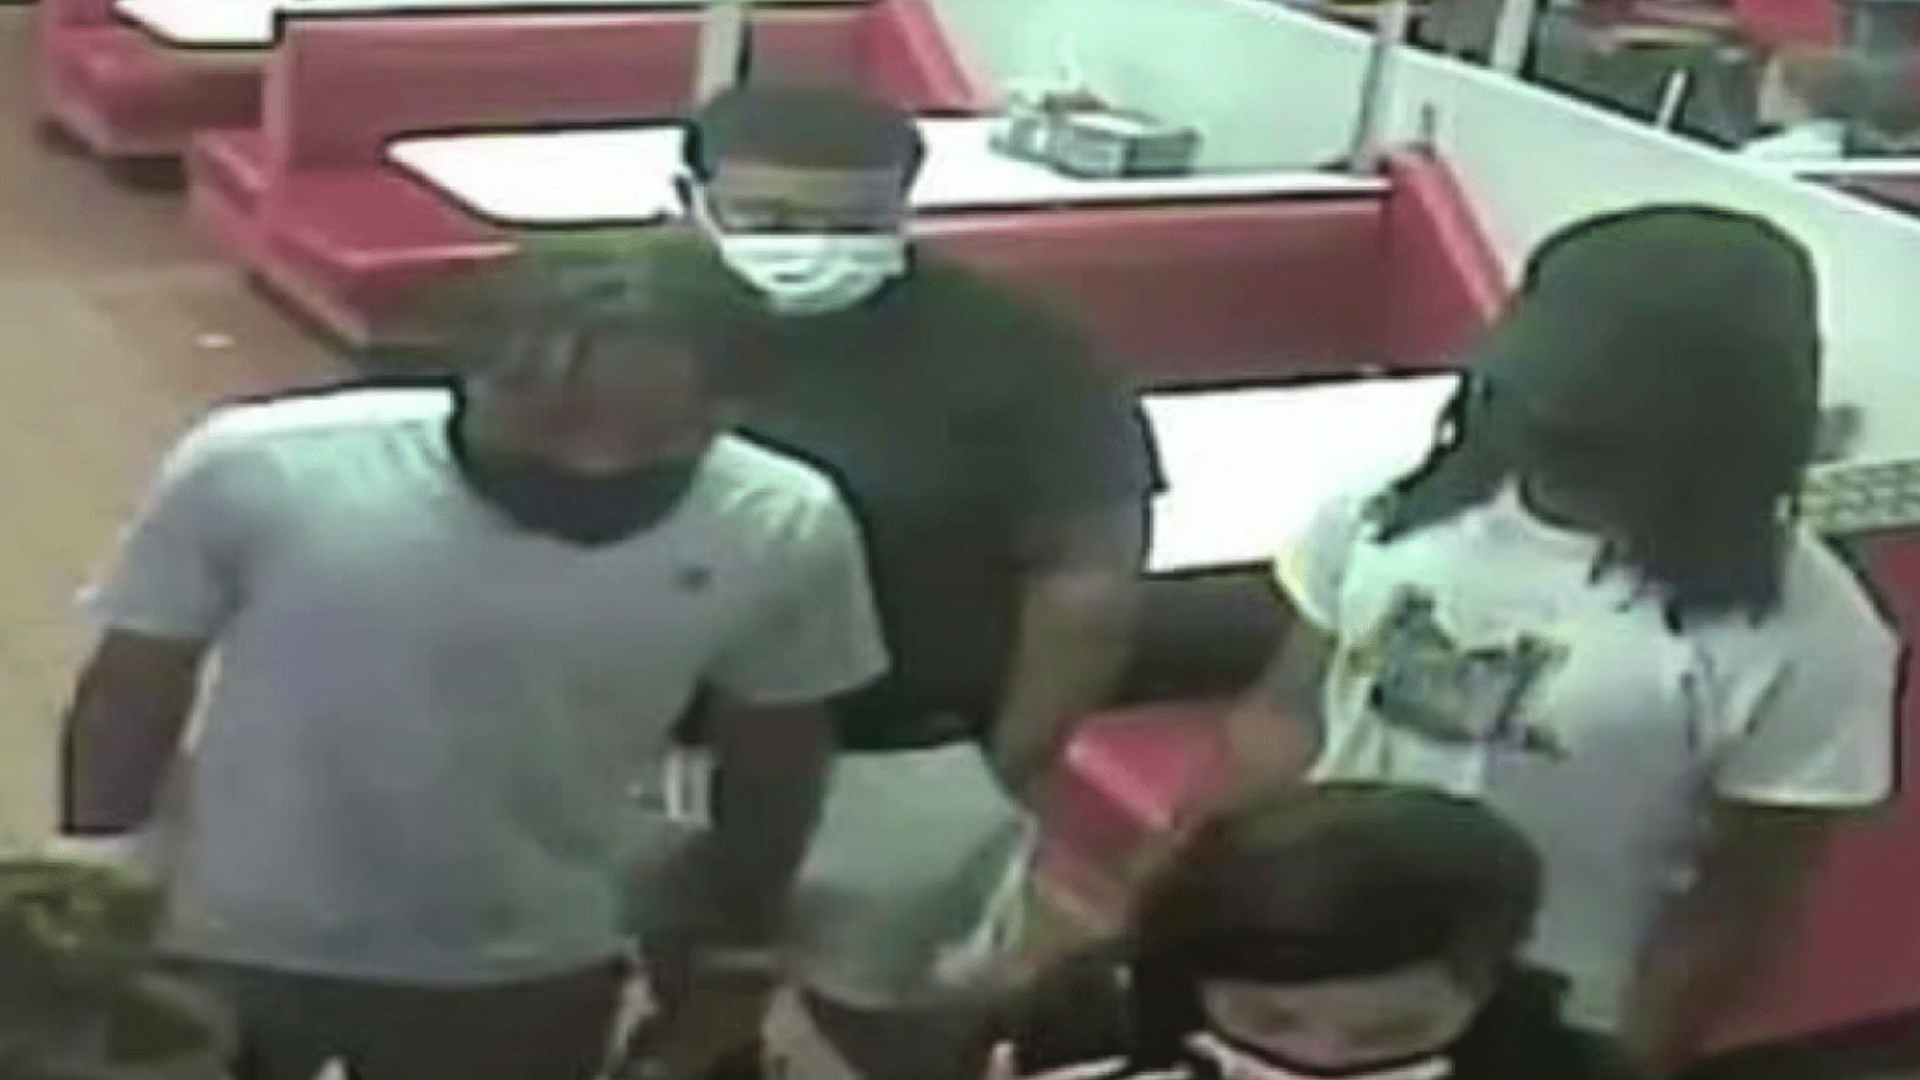 New Jersey Customers Reportedly Assaulted and Kidnapped Waitress Over Unpaid $70 Bill